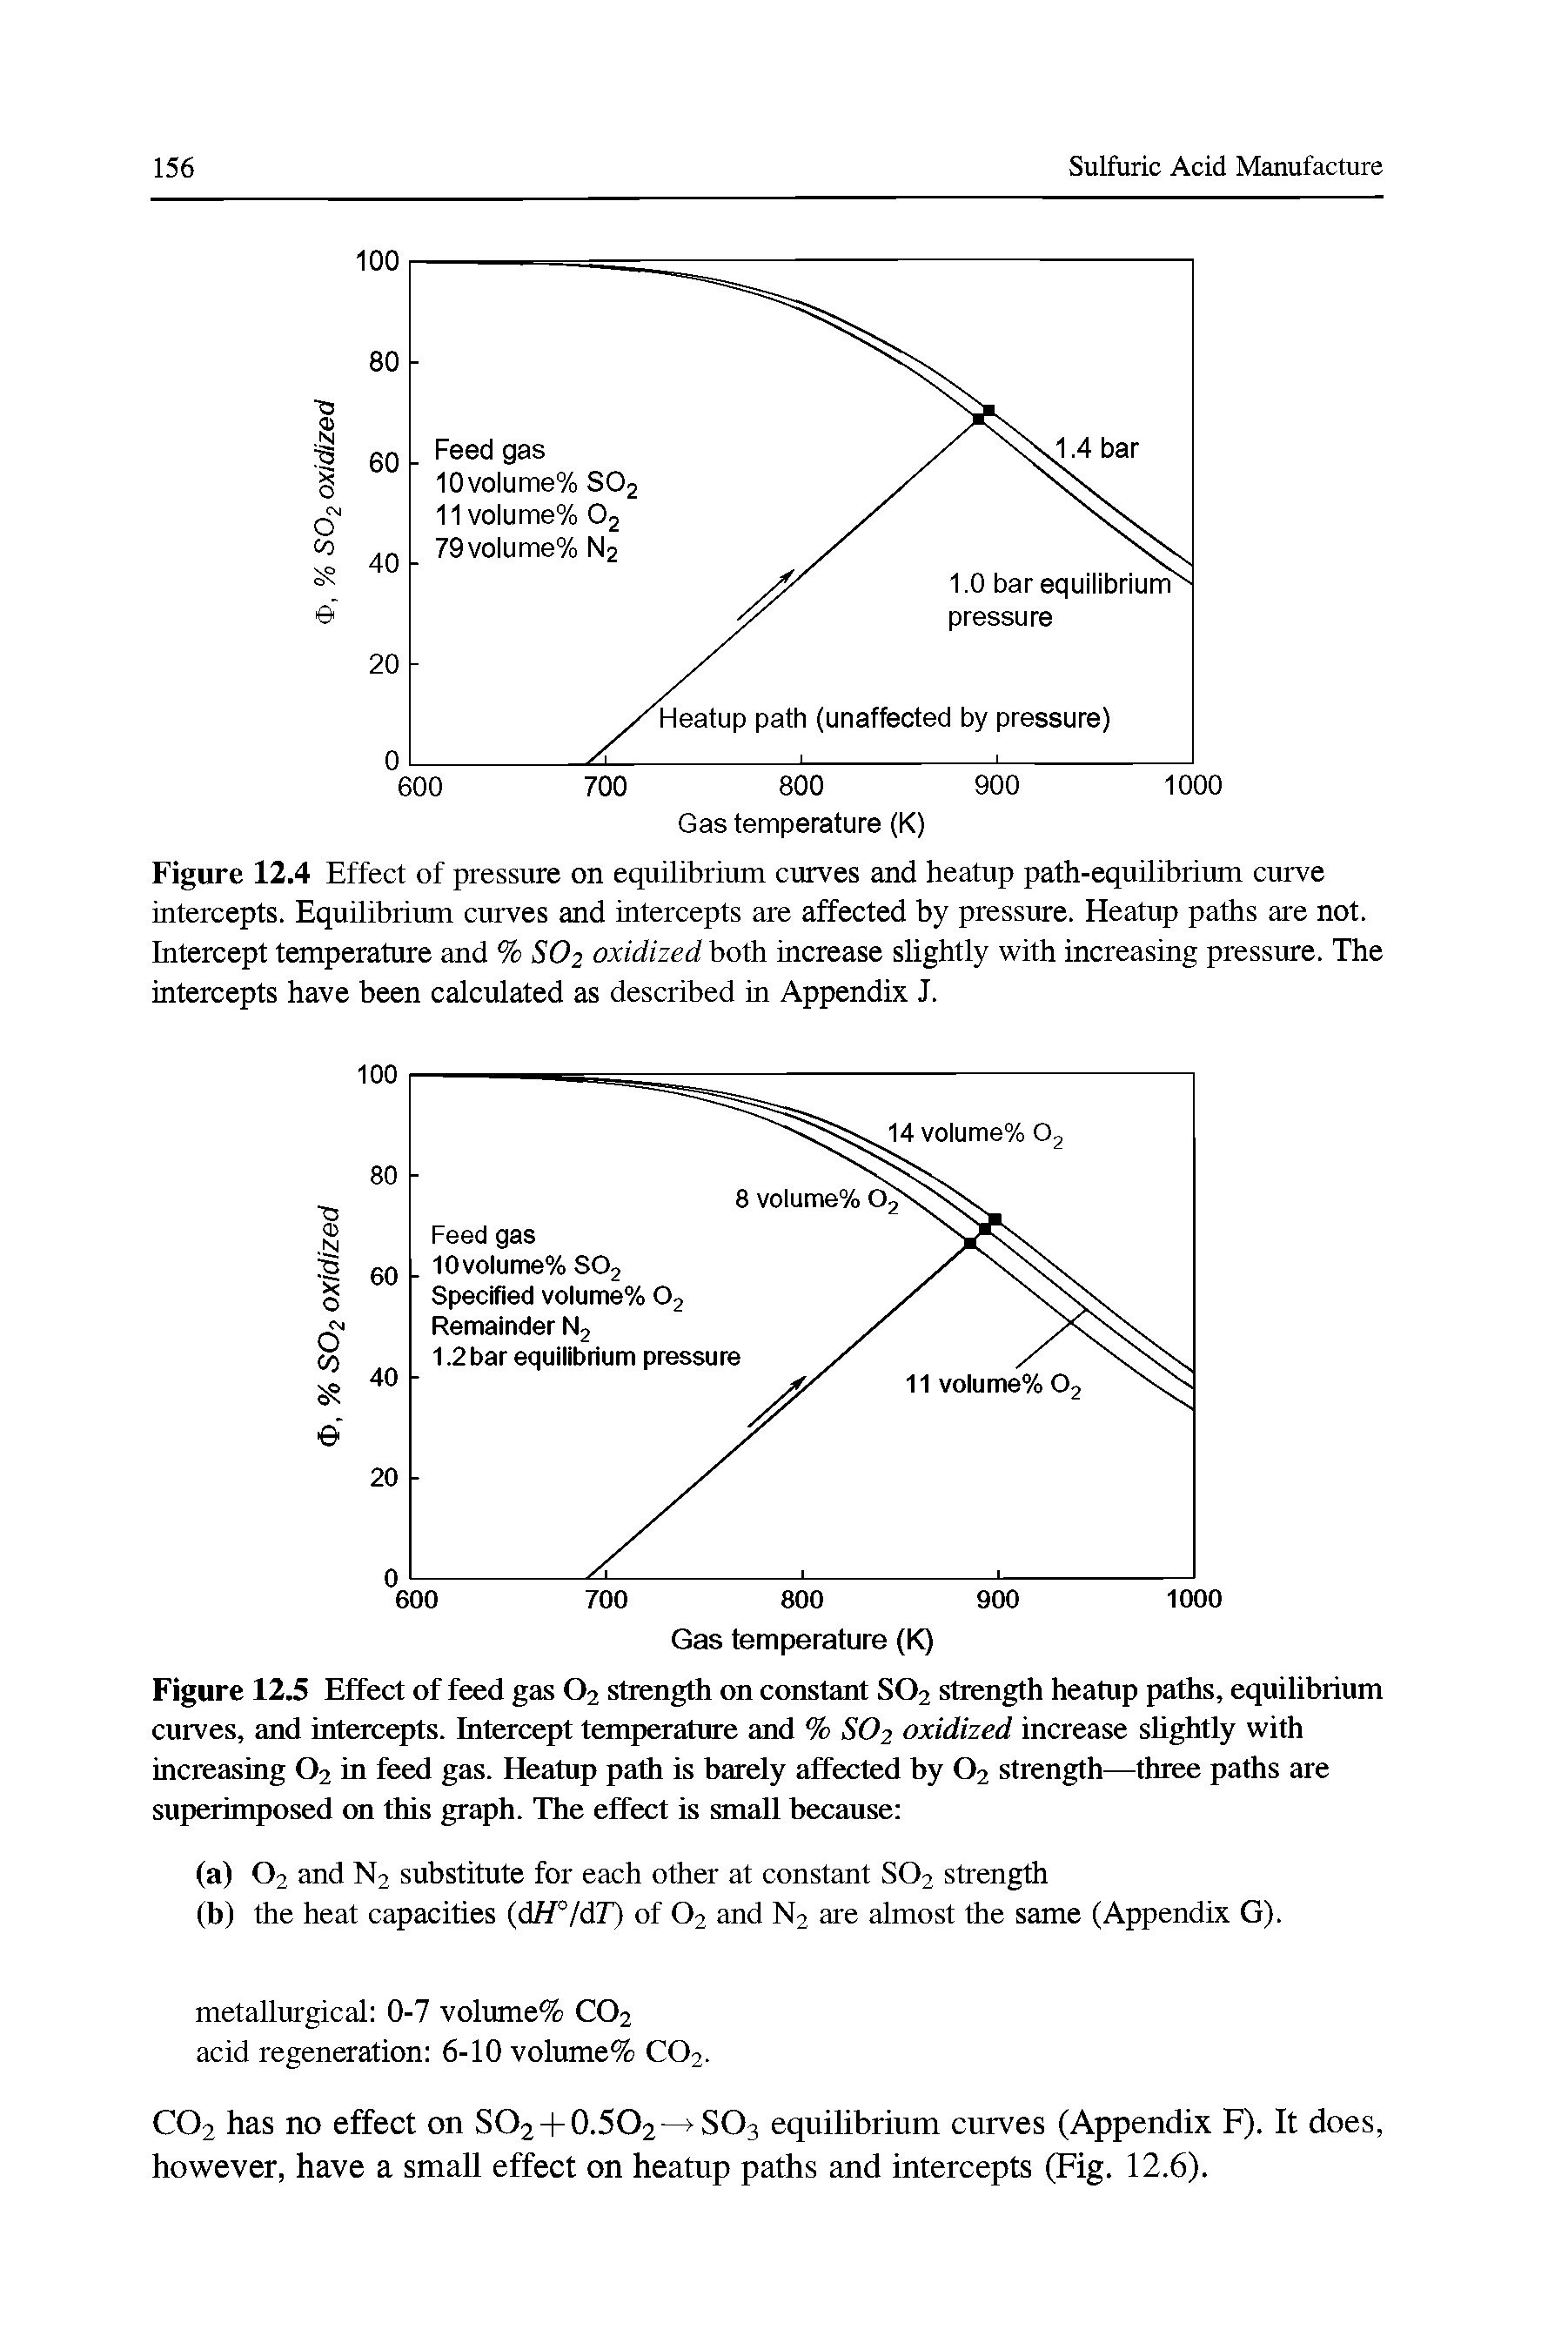 Figure 12.4 Effect of pressure on equilibrium curves and heatup path-equilibrium curve intercepts. Equilibrium curves and intercepts are affected by pressure. Heatup paths are not. Intercept temperature and % SO2 oxidized both increase shghtly with increasing pressure. The intercepts have been calculated as described in Appendix J.